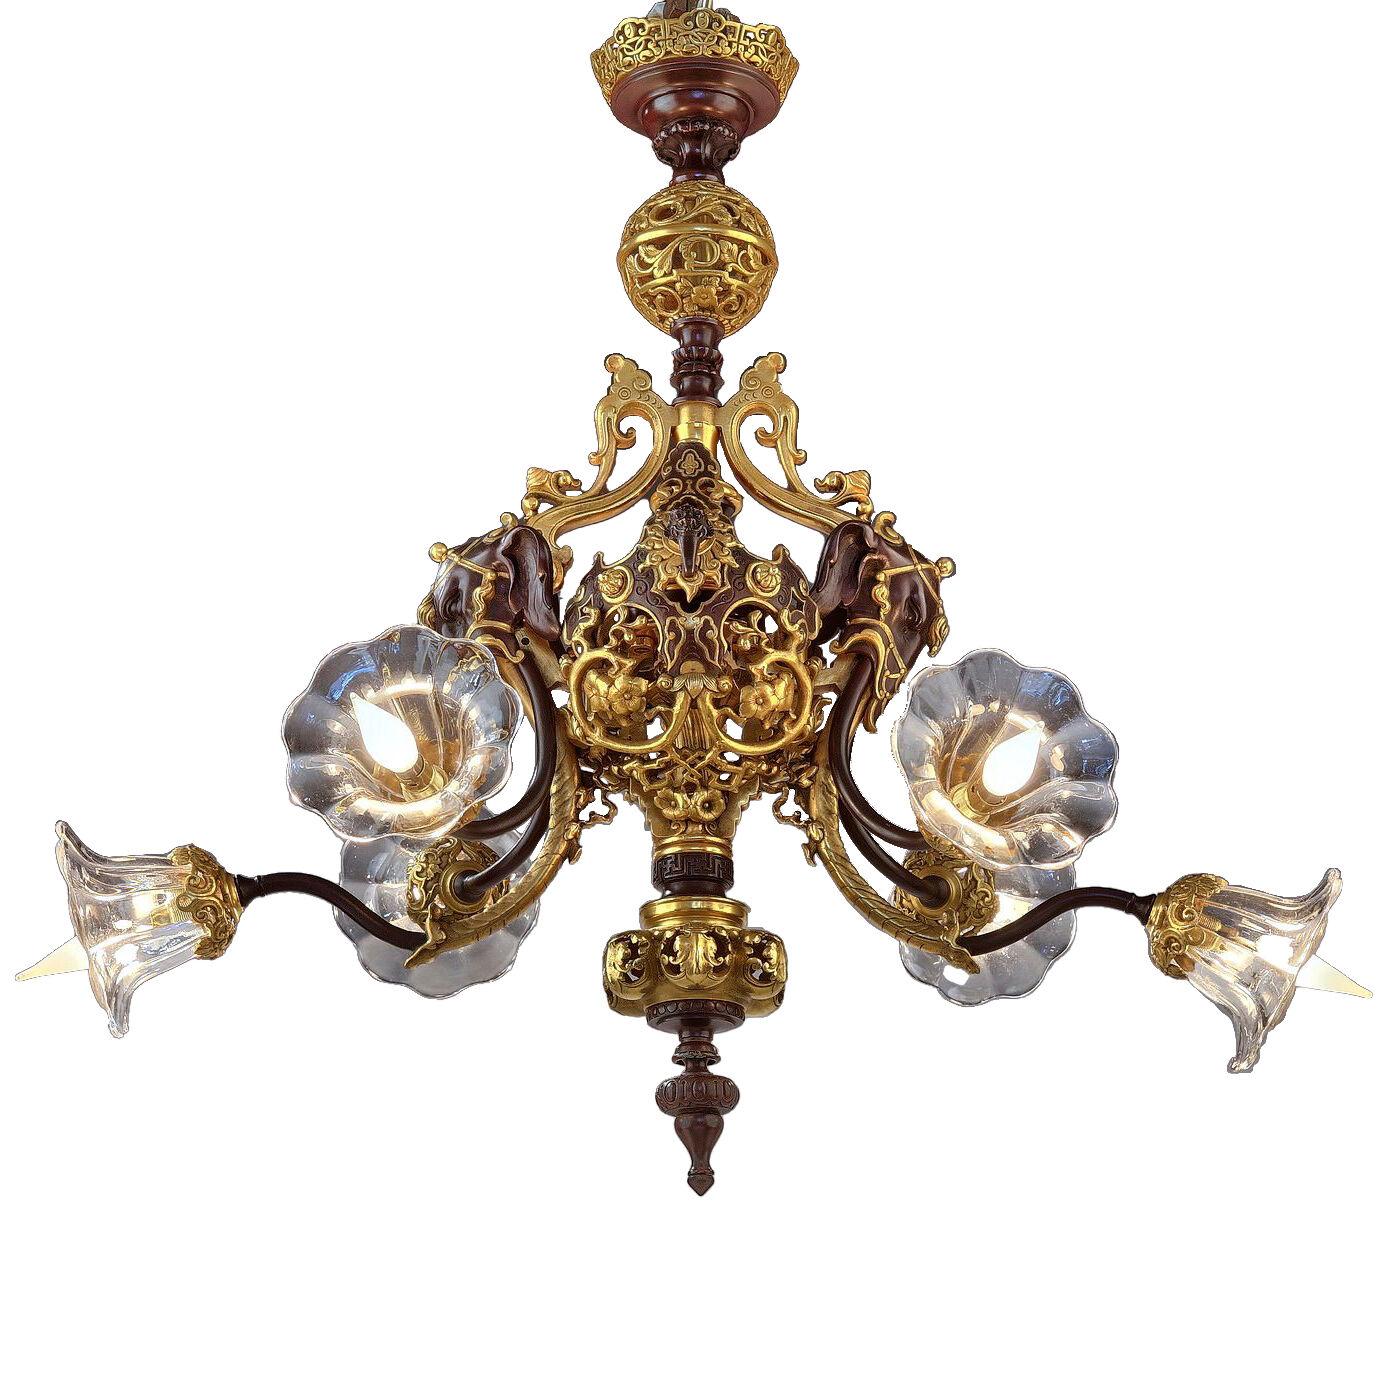 Elegant Oriental Style Chandelier Attributed to Maison Marnyhac, France, c. 1870